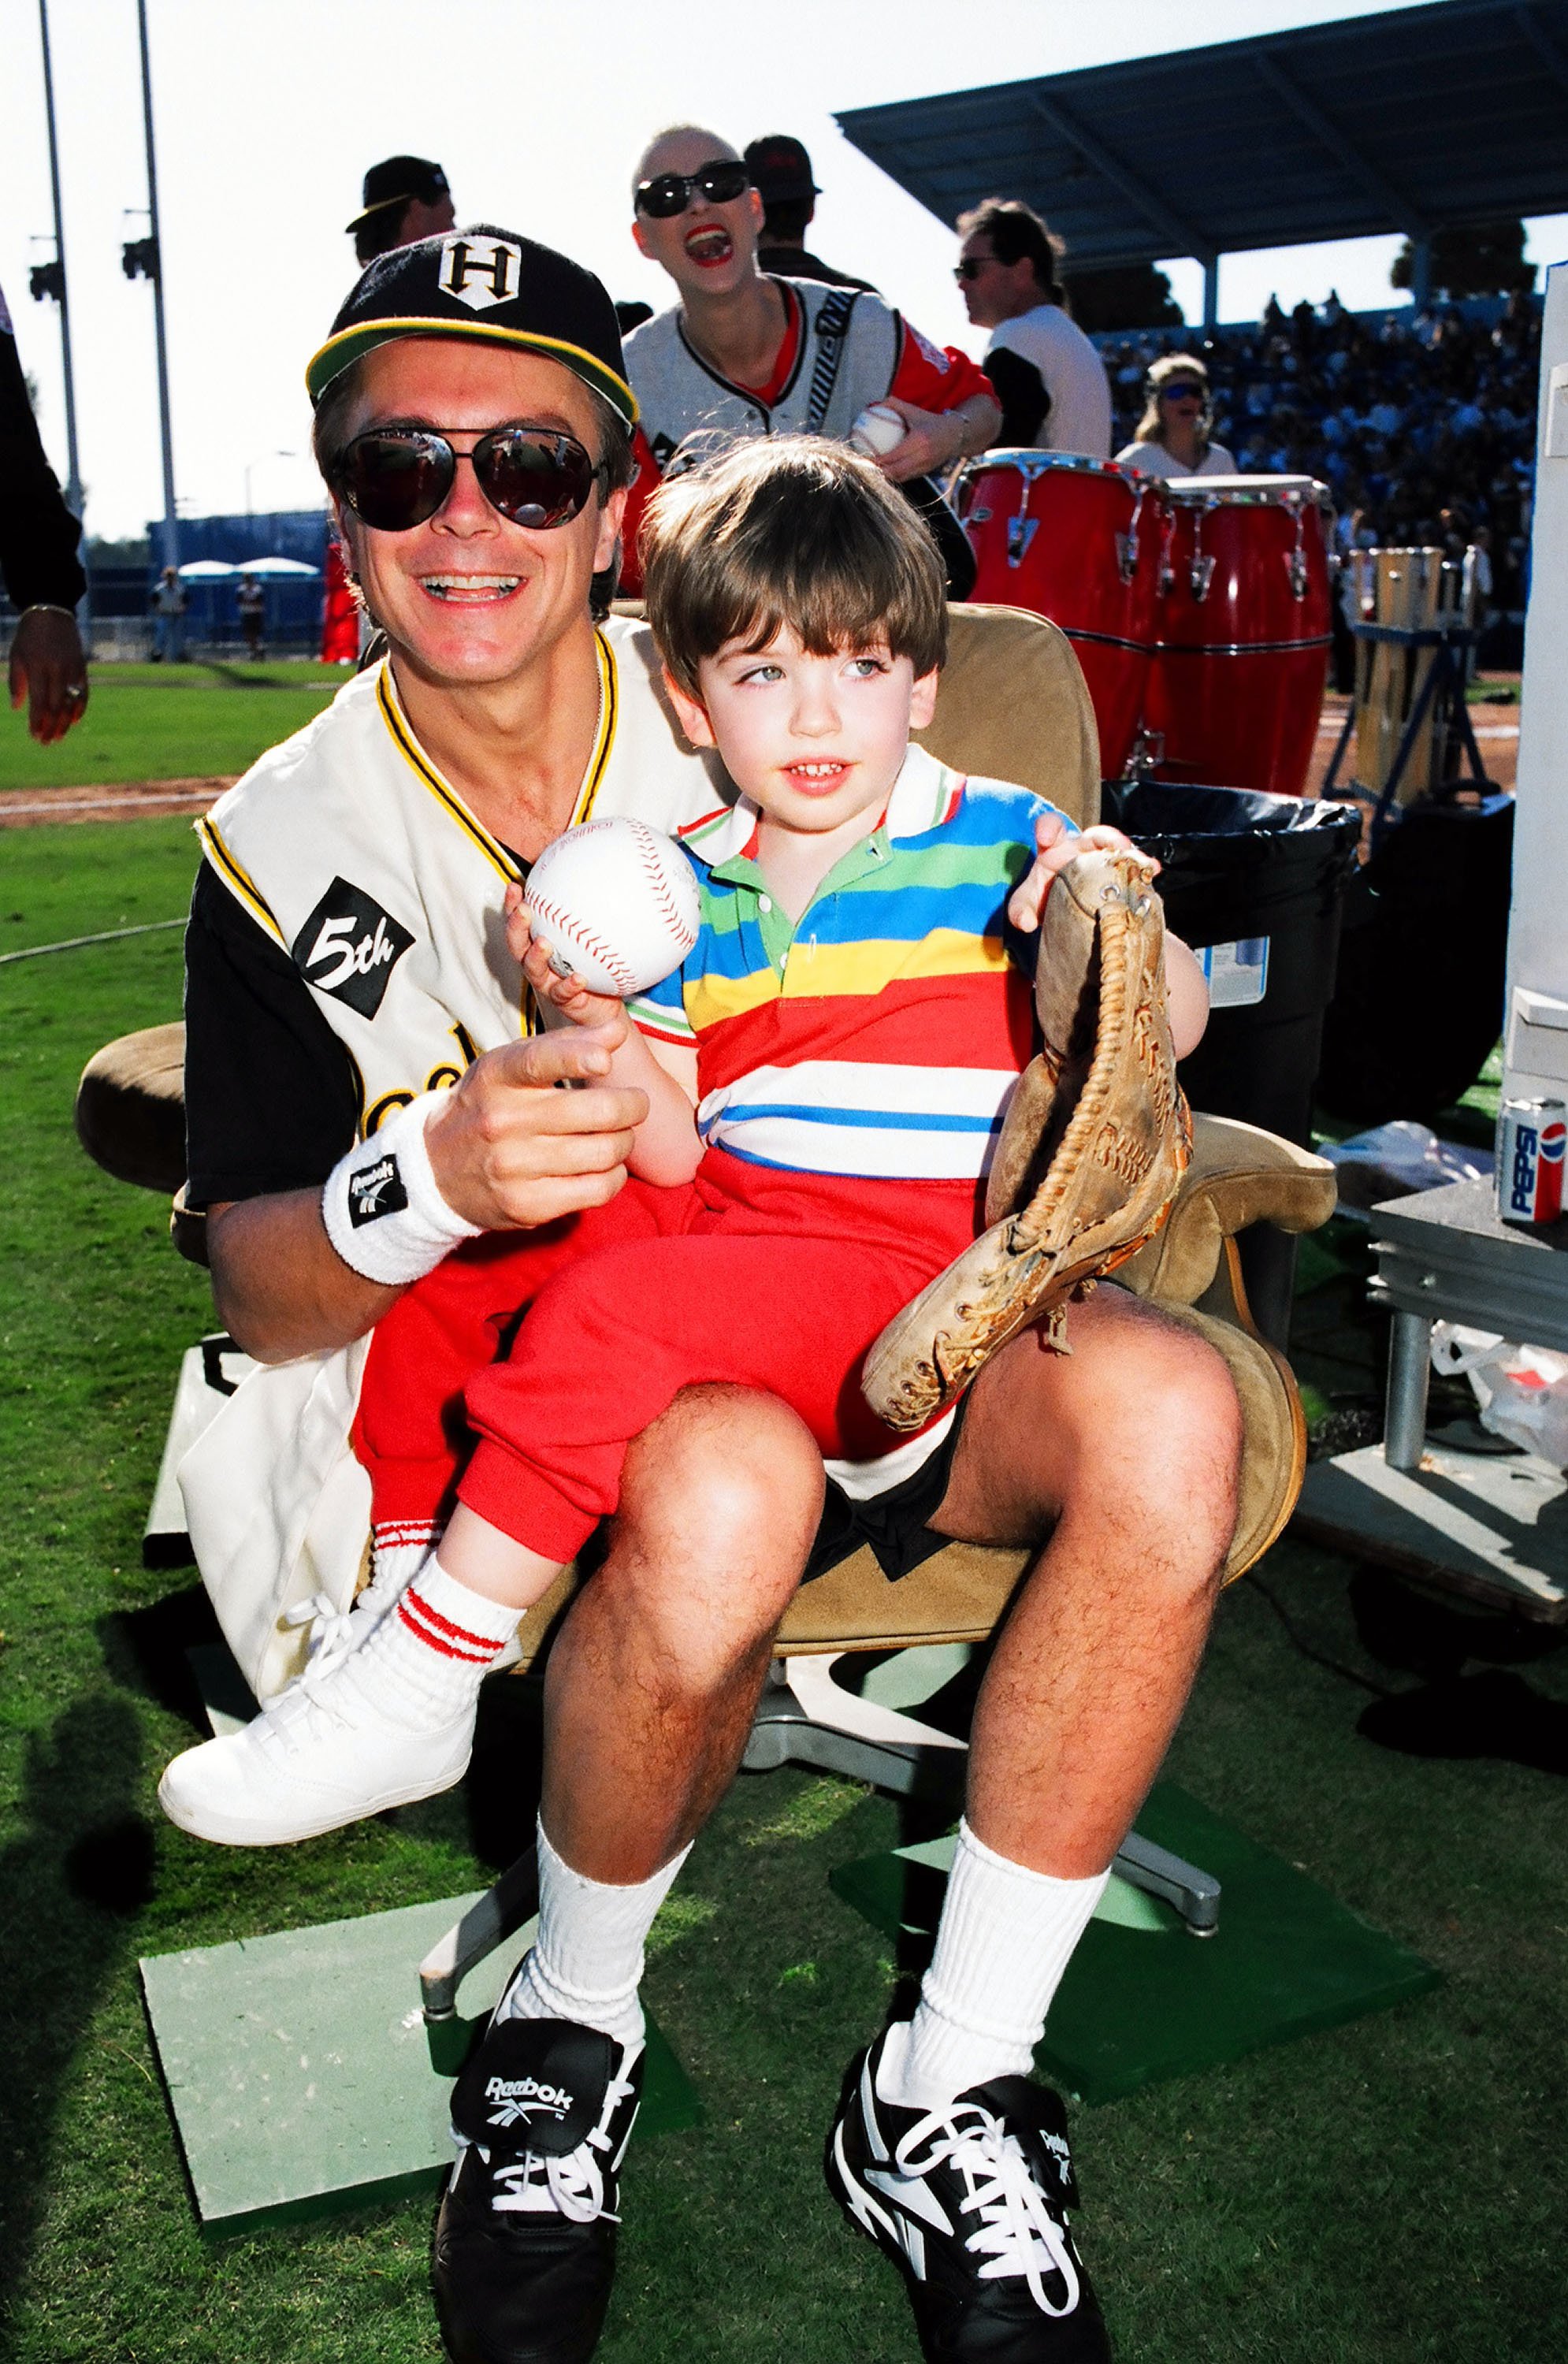 David Cassidy and his son Beau Cassidy during MTV's 3rd Annual Rock 'n Jock Softball at Memorial Park in Long Beach, California, on January 23, 1992 | Source: Getty Images